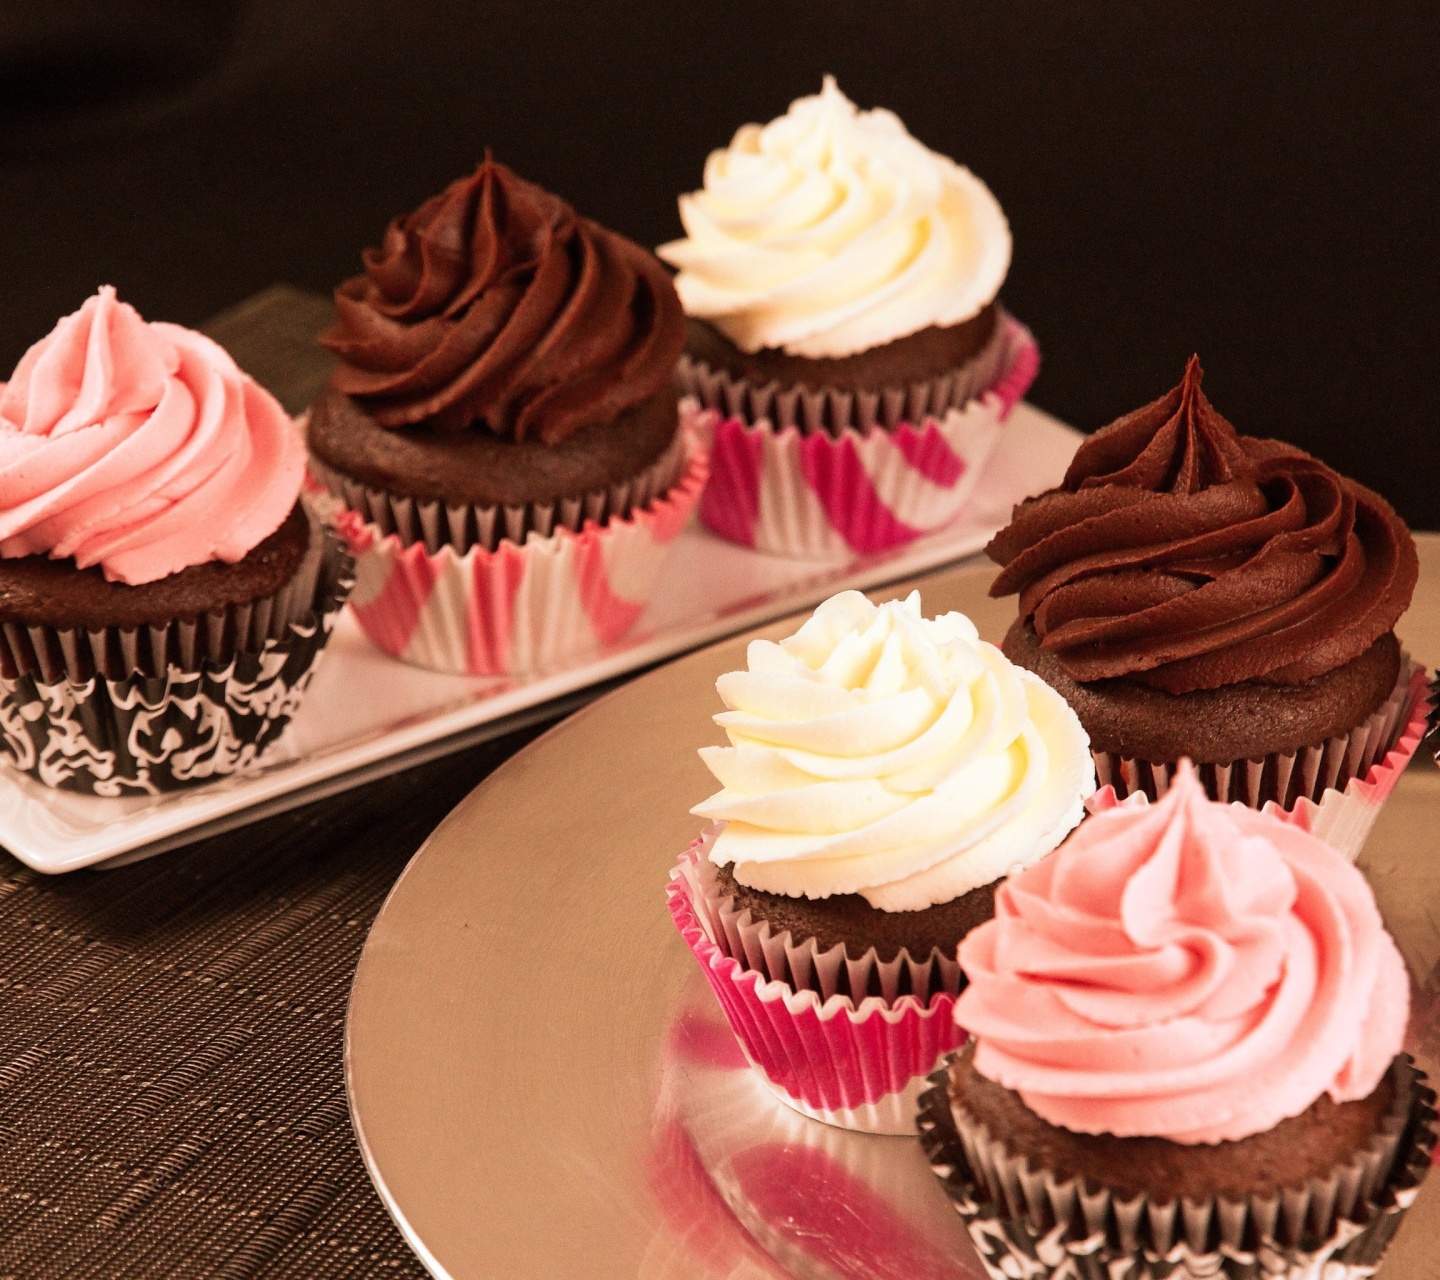 Cupcakes with Creme wallpaper 1440x1280